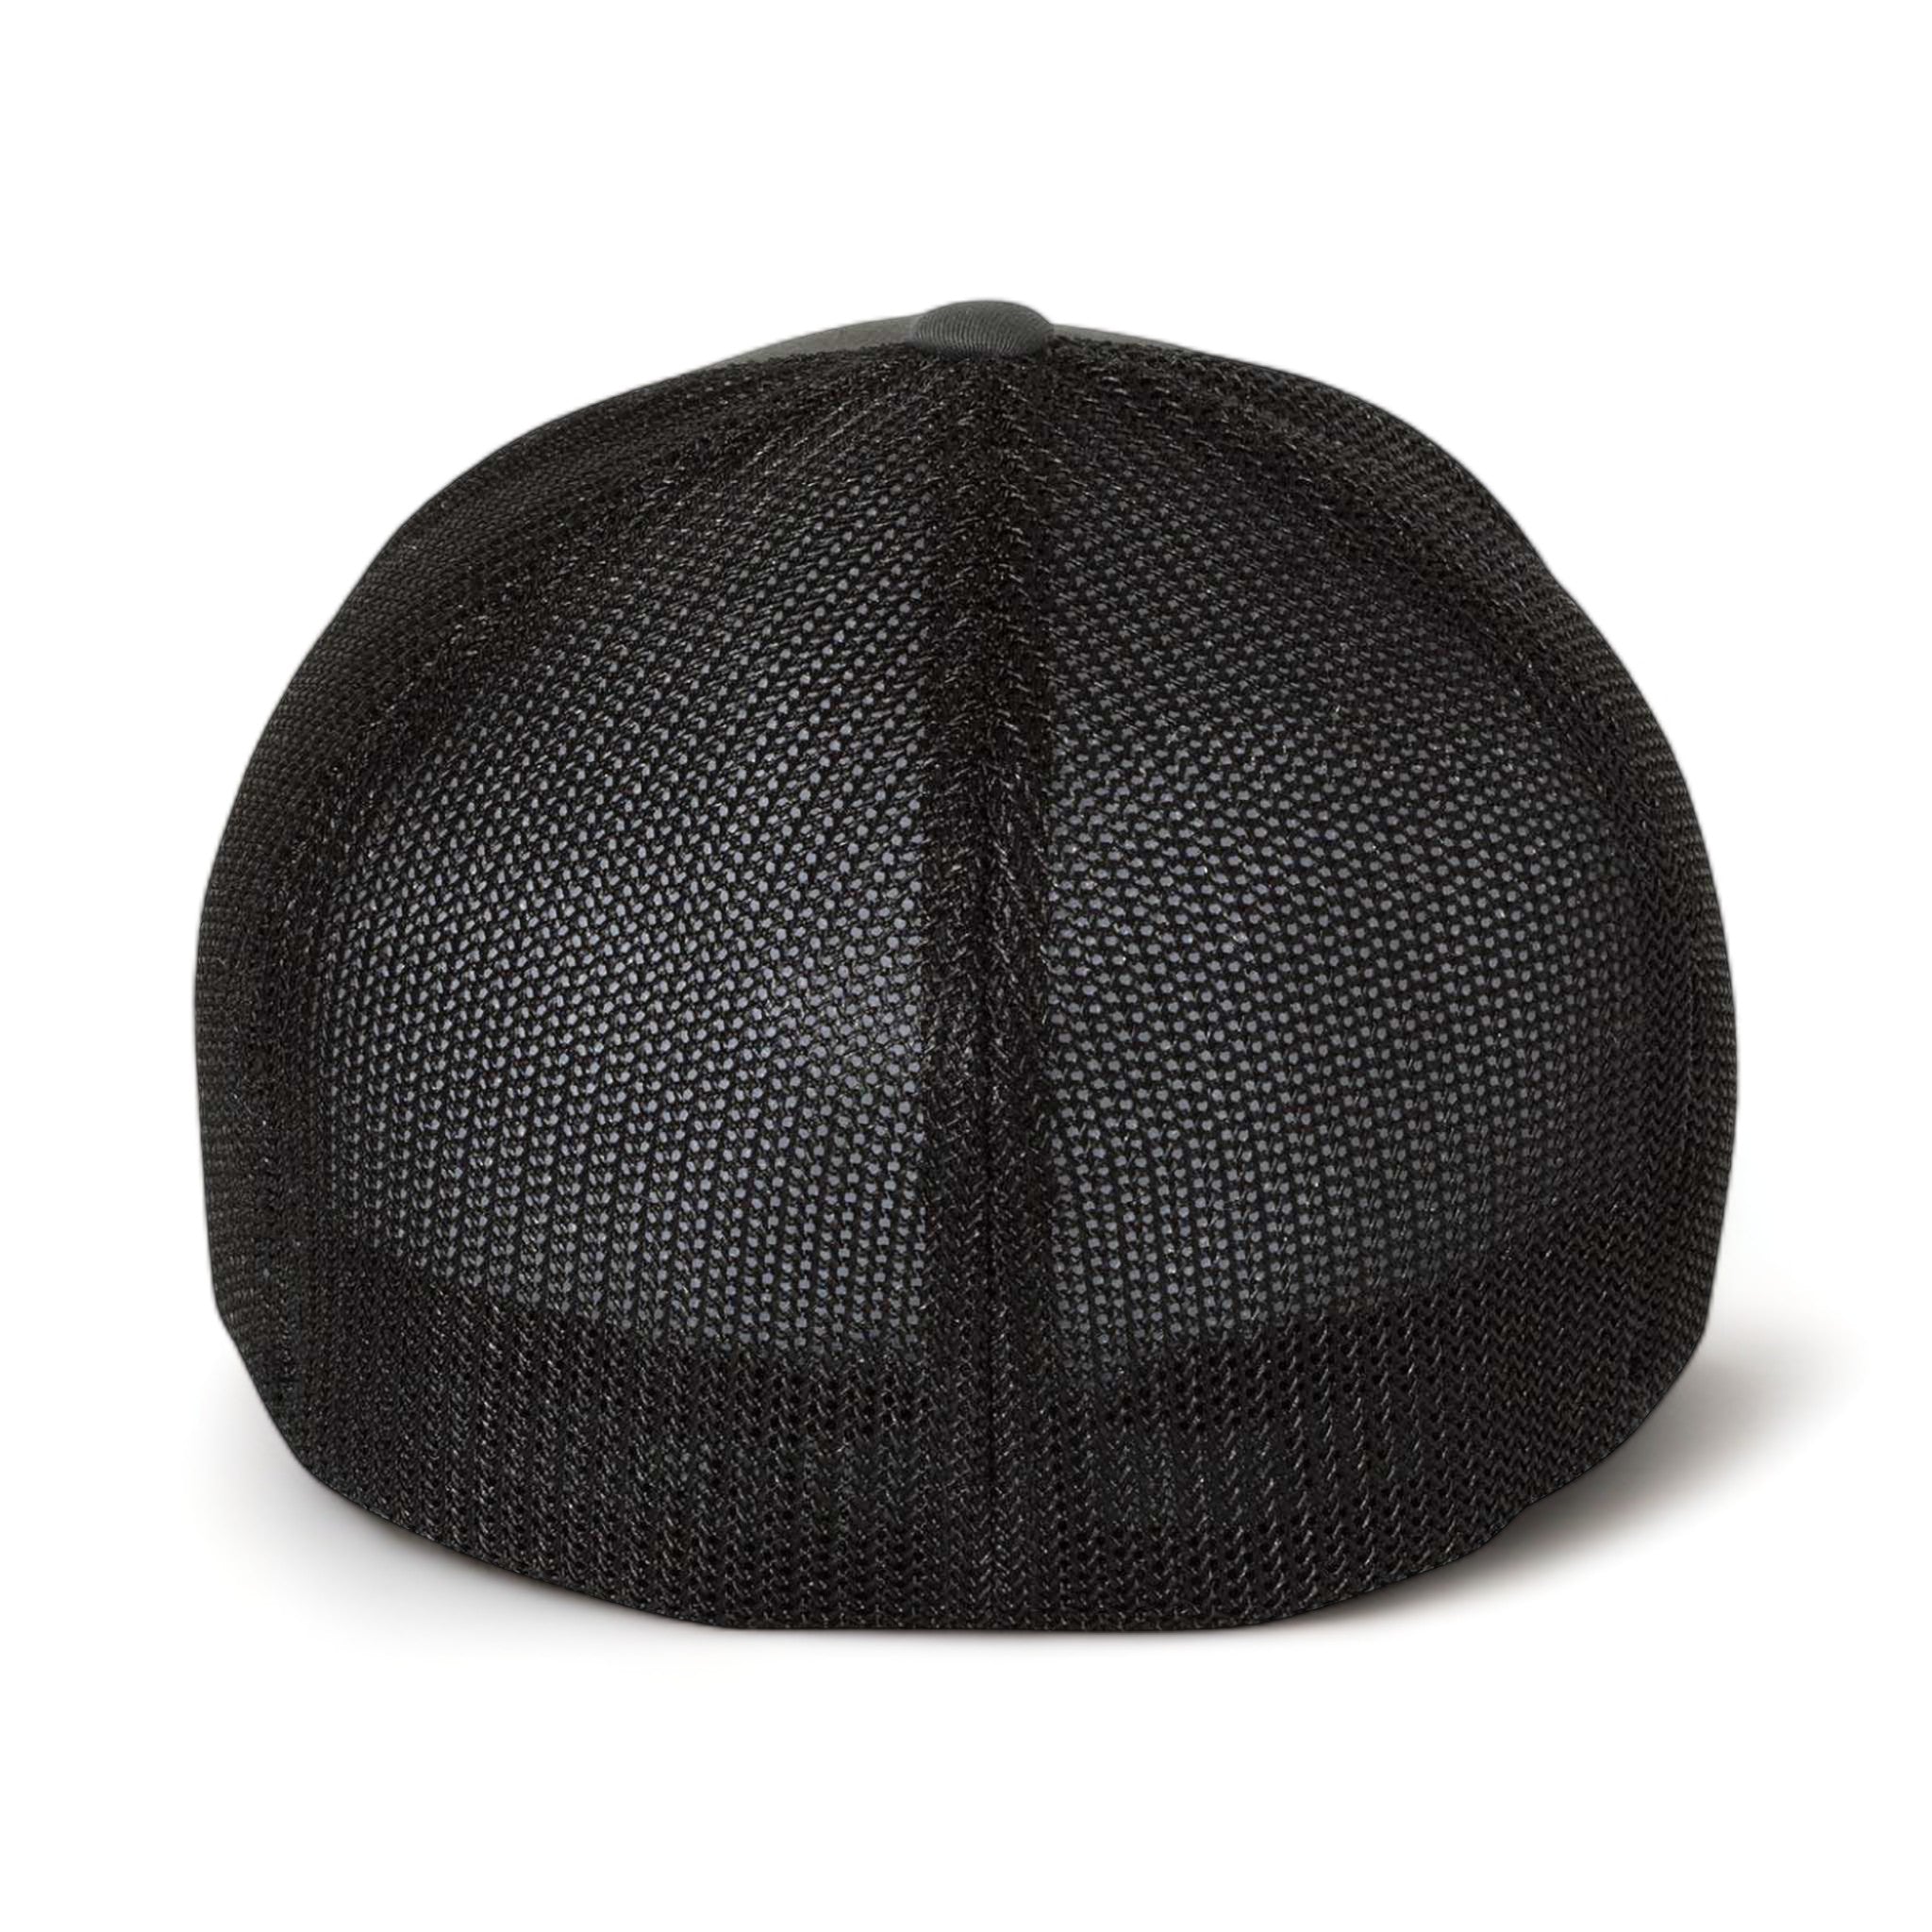 Back view of Flexfit 6511 custom hat in charcoal and black